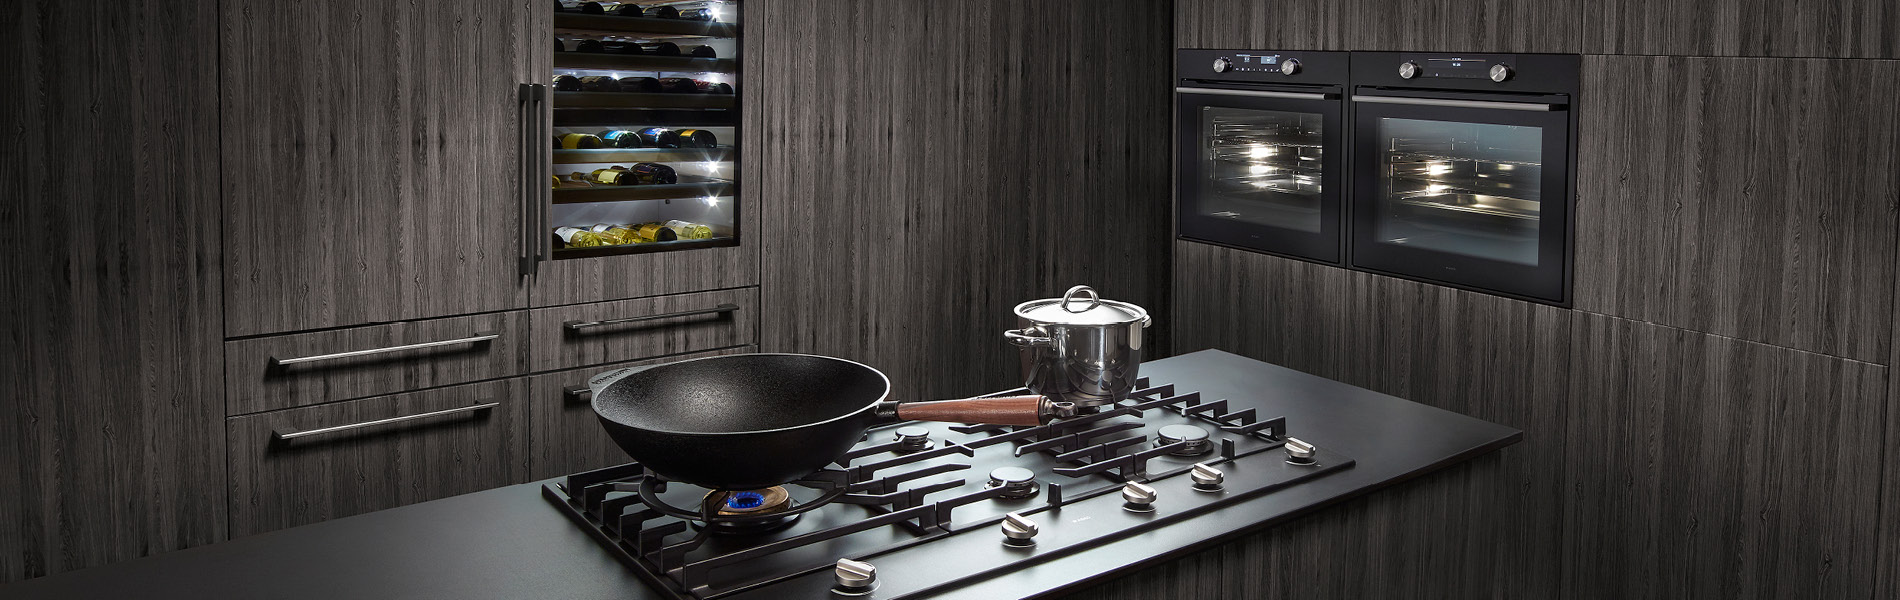 Run Out Offer - Save Up To $1,100 On ASKO Anthracite Ovens at Hart & Co